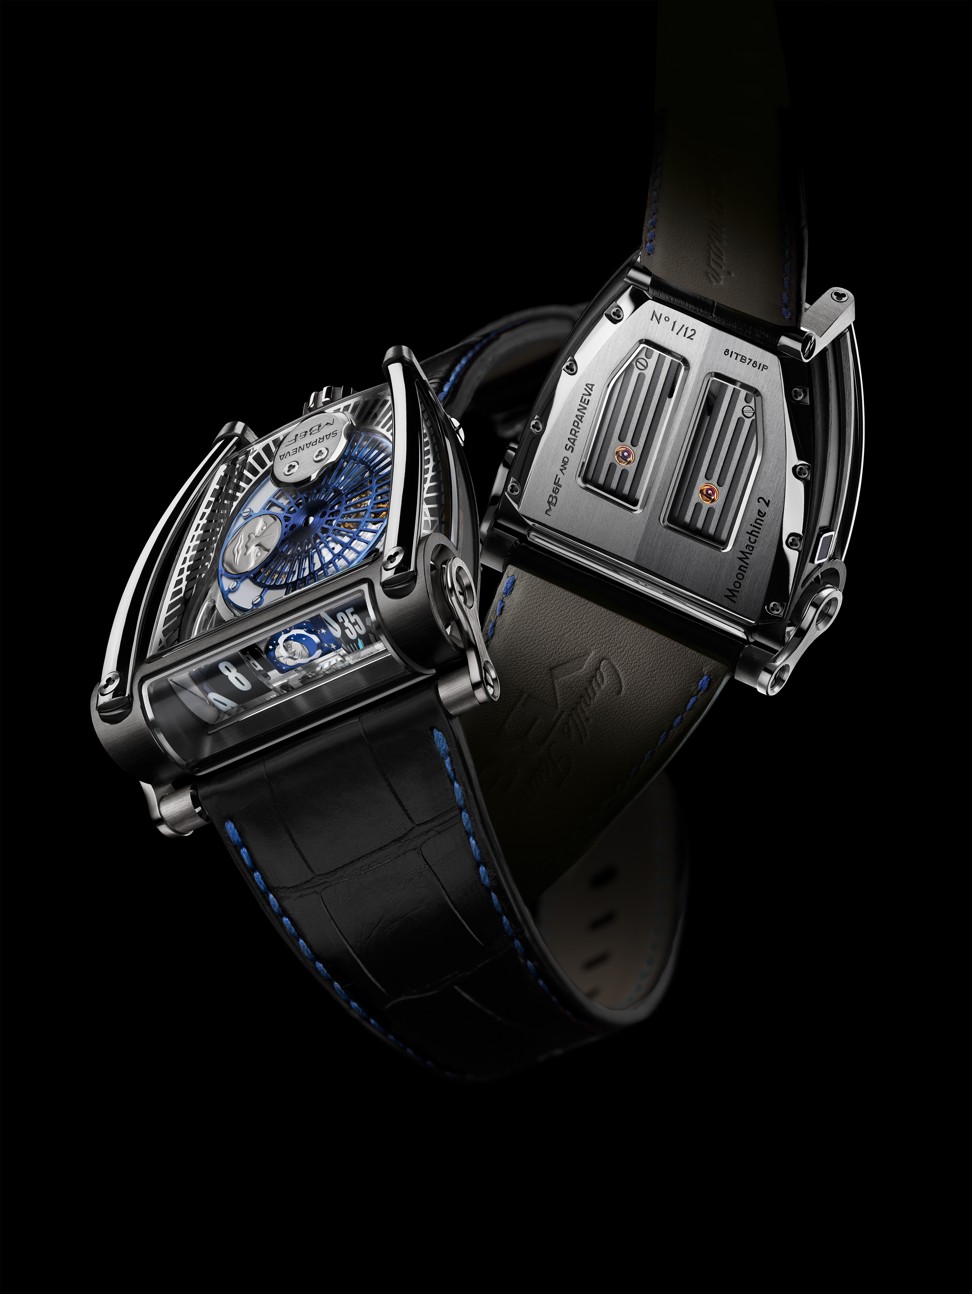 MB&F’s MoonMachine 2 is like an optical illusion.